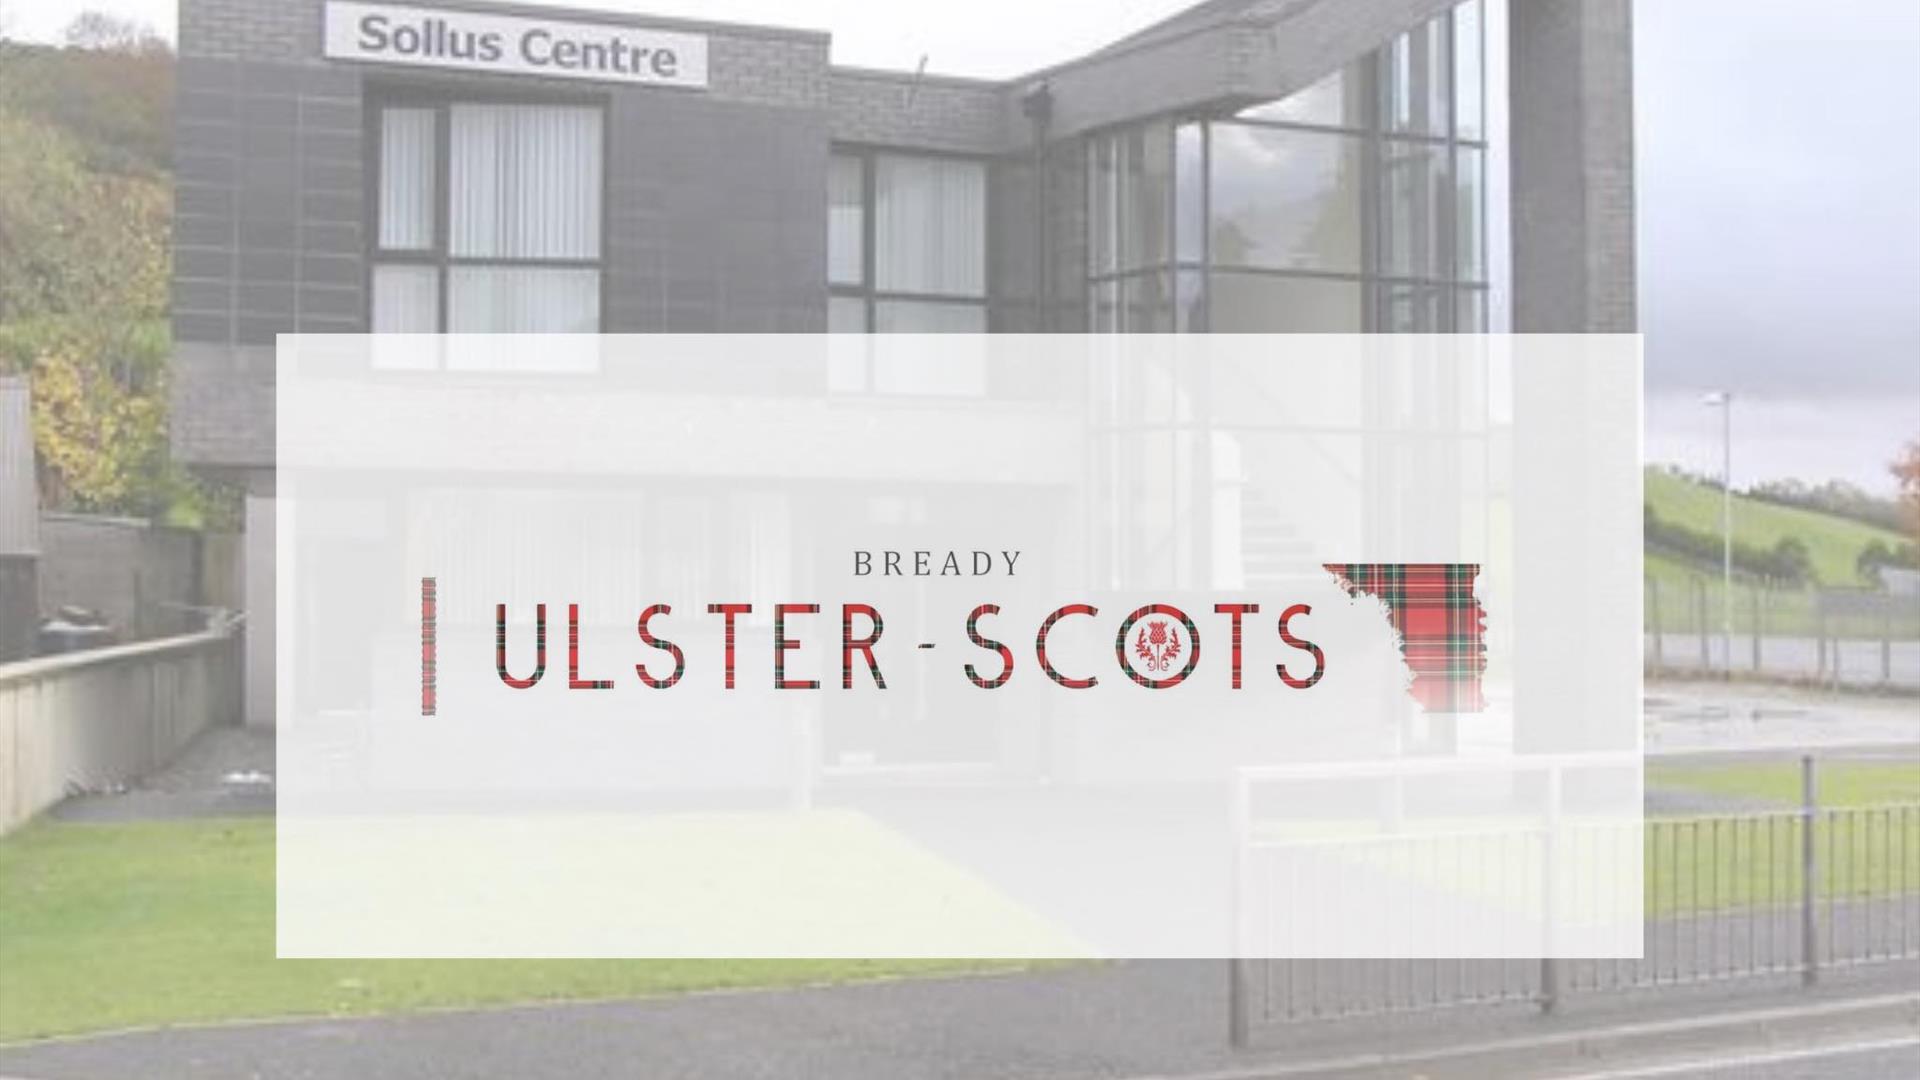 The logo and exterior of the Bready and District Ulster Scots Development Association.